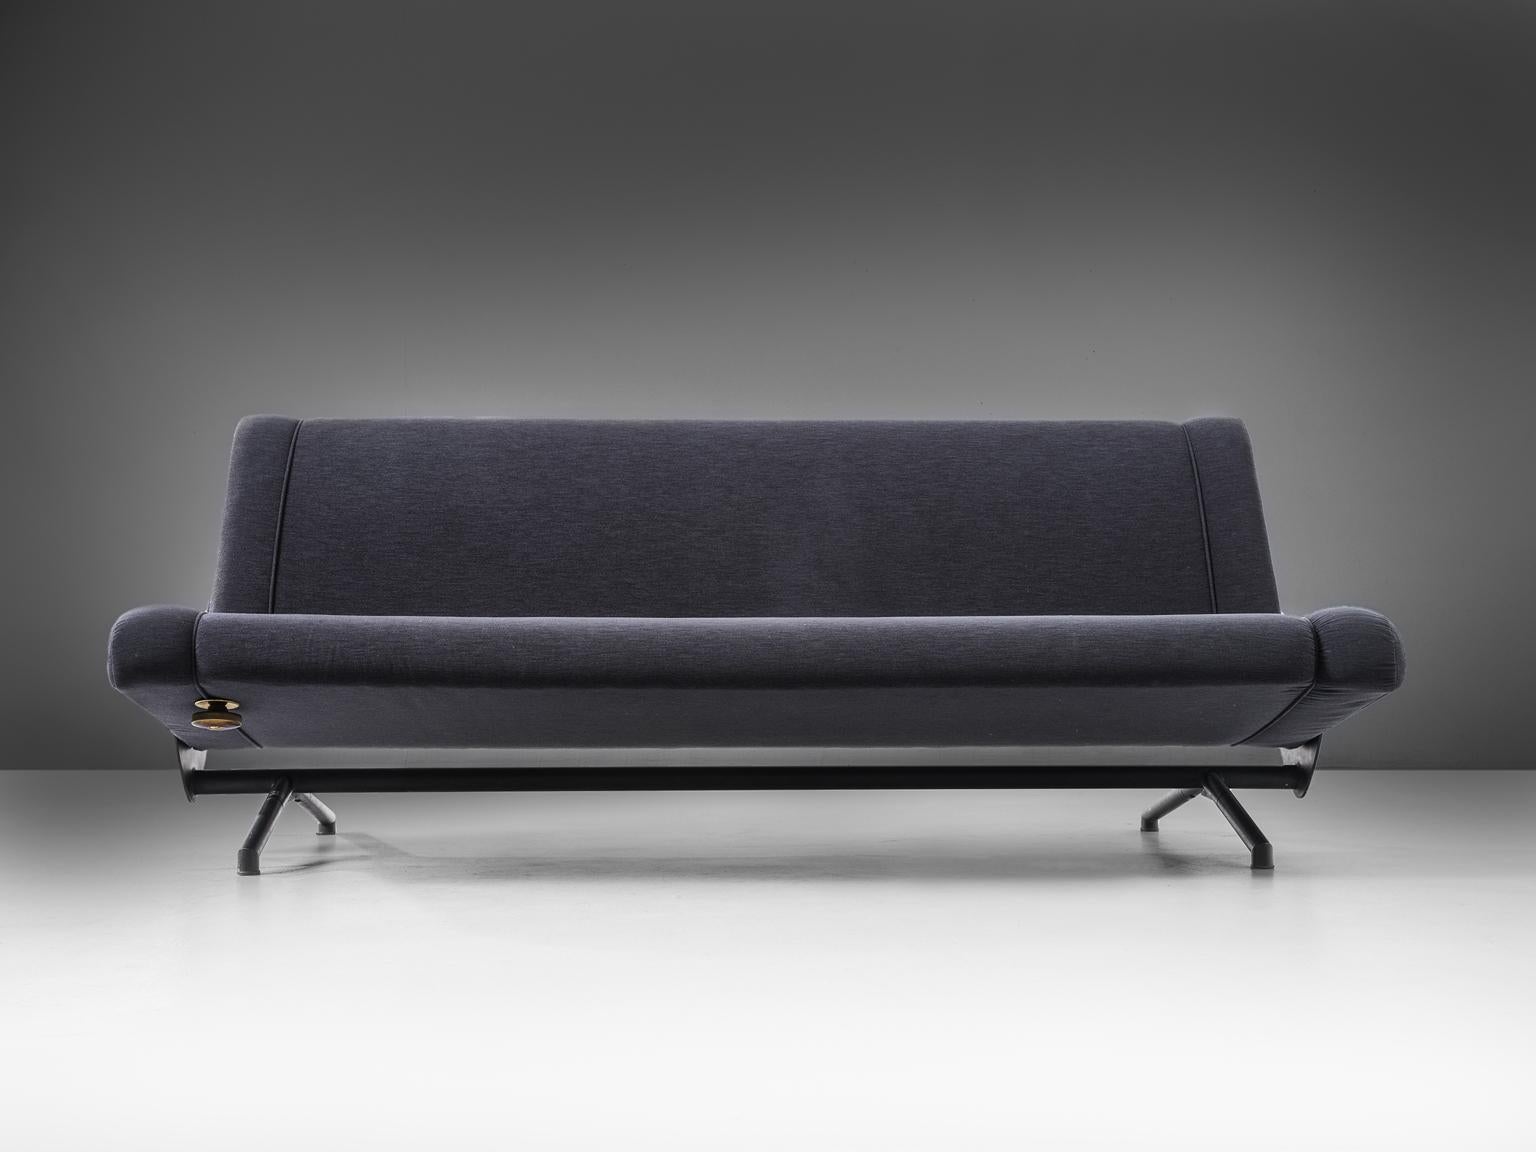 Sofa daybed model D70, in steel, brass and fabric, by Osvaldo Borsani for Tecno, Italy 1954.

Adjustable sofa in grey-blue upholstery. This design was presented on the Triennale of Milan in 1954. It won instantly the gold medal for design. This